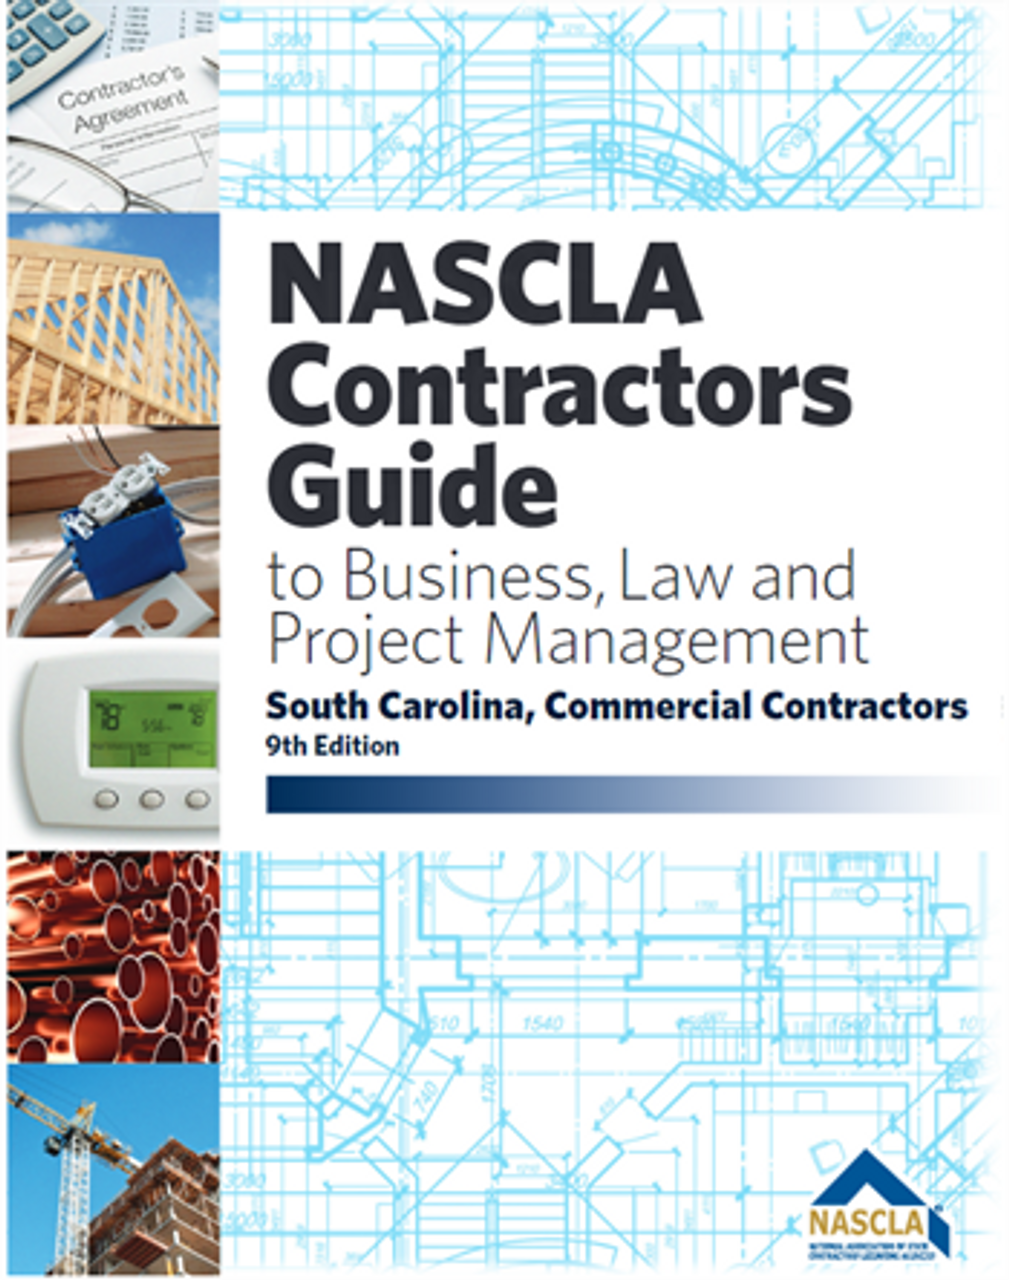 SOUTH CAROLINA Commercial Contractors Guide to Business, Law and Project Management, 9th Edition